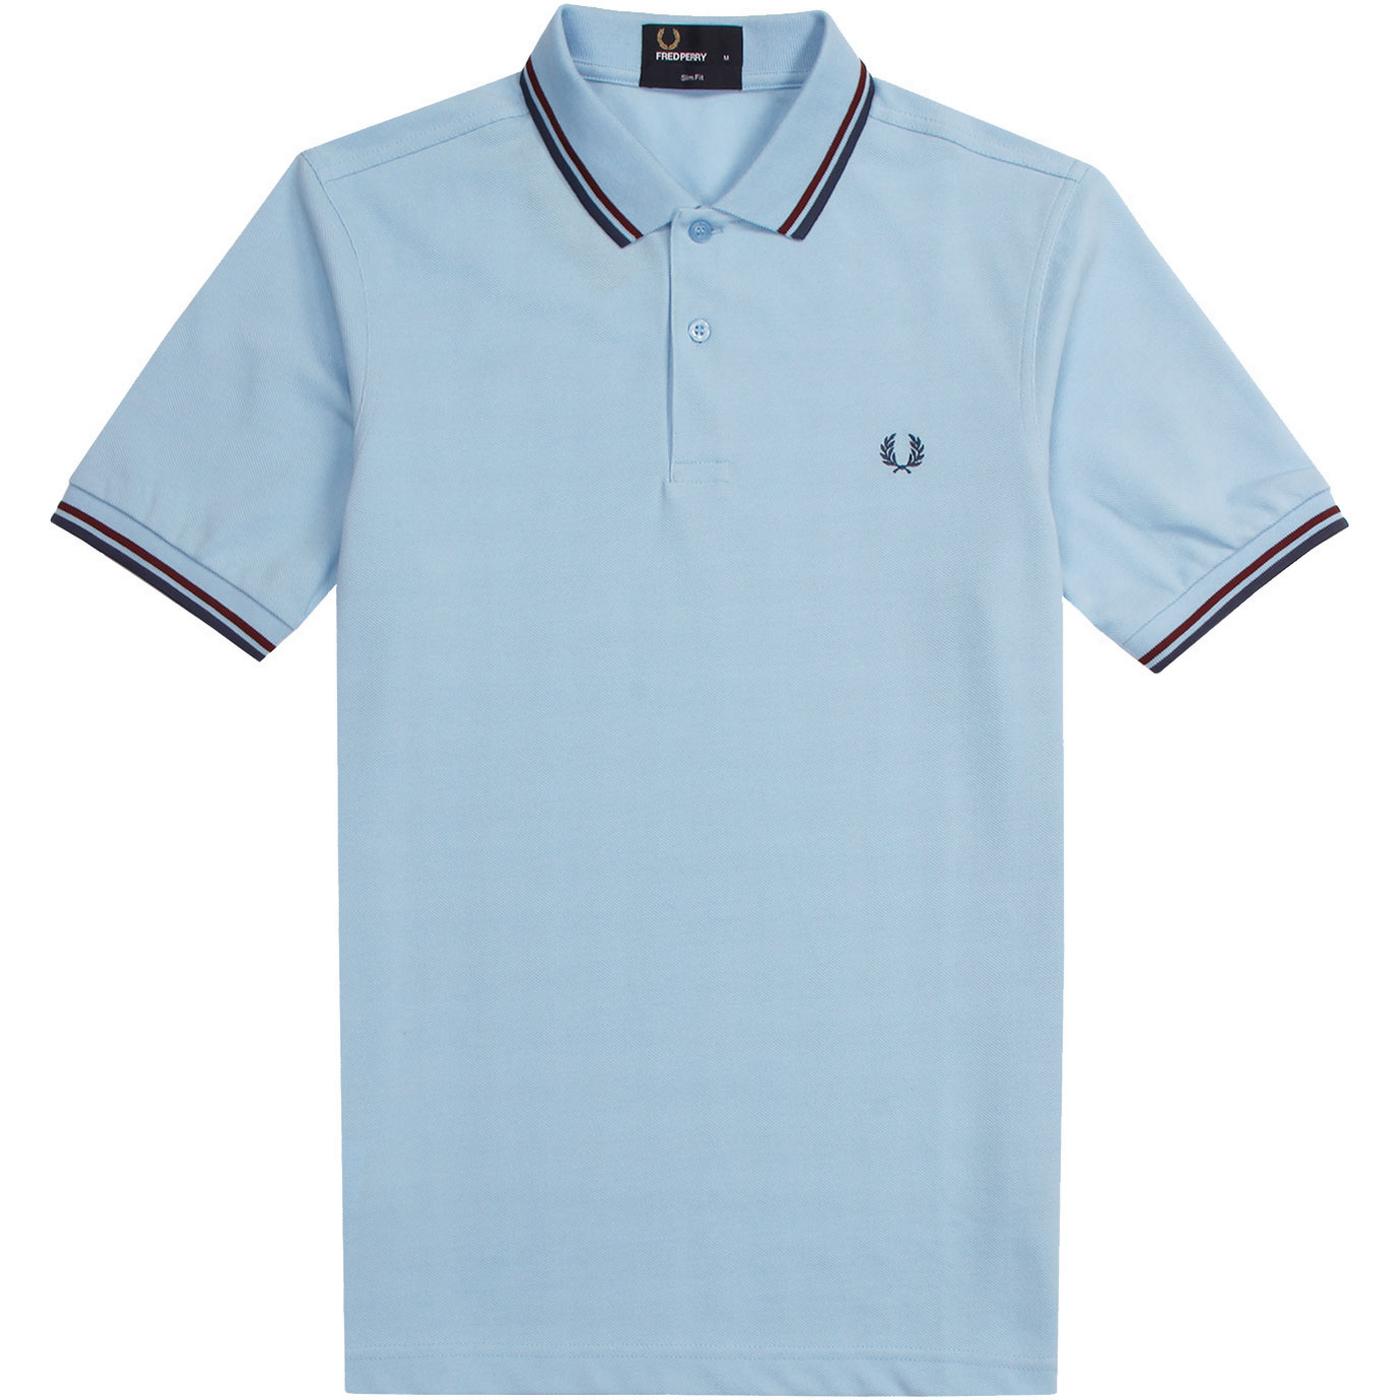 FRED PERRY M3600 Mod Twin Tipped Polo Top in Sky Blue